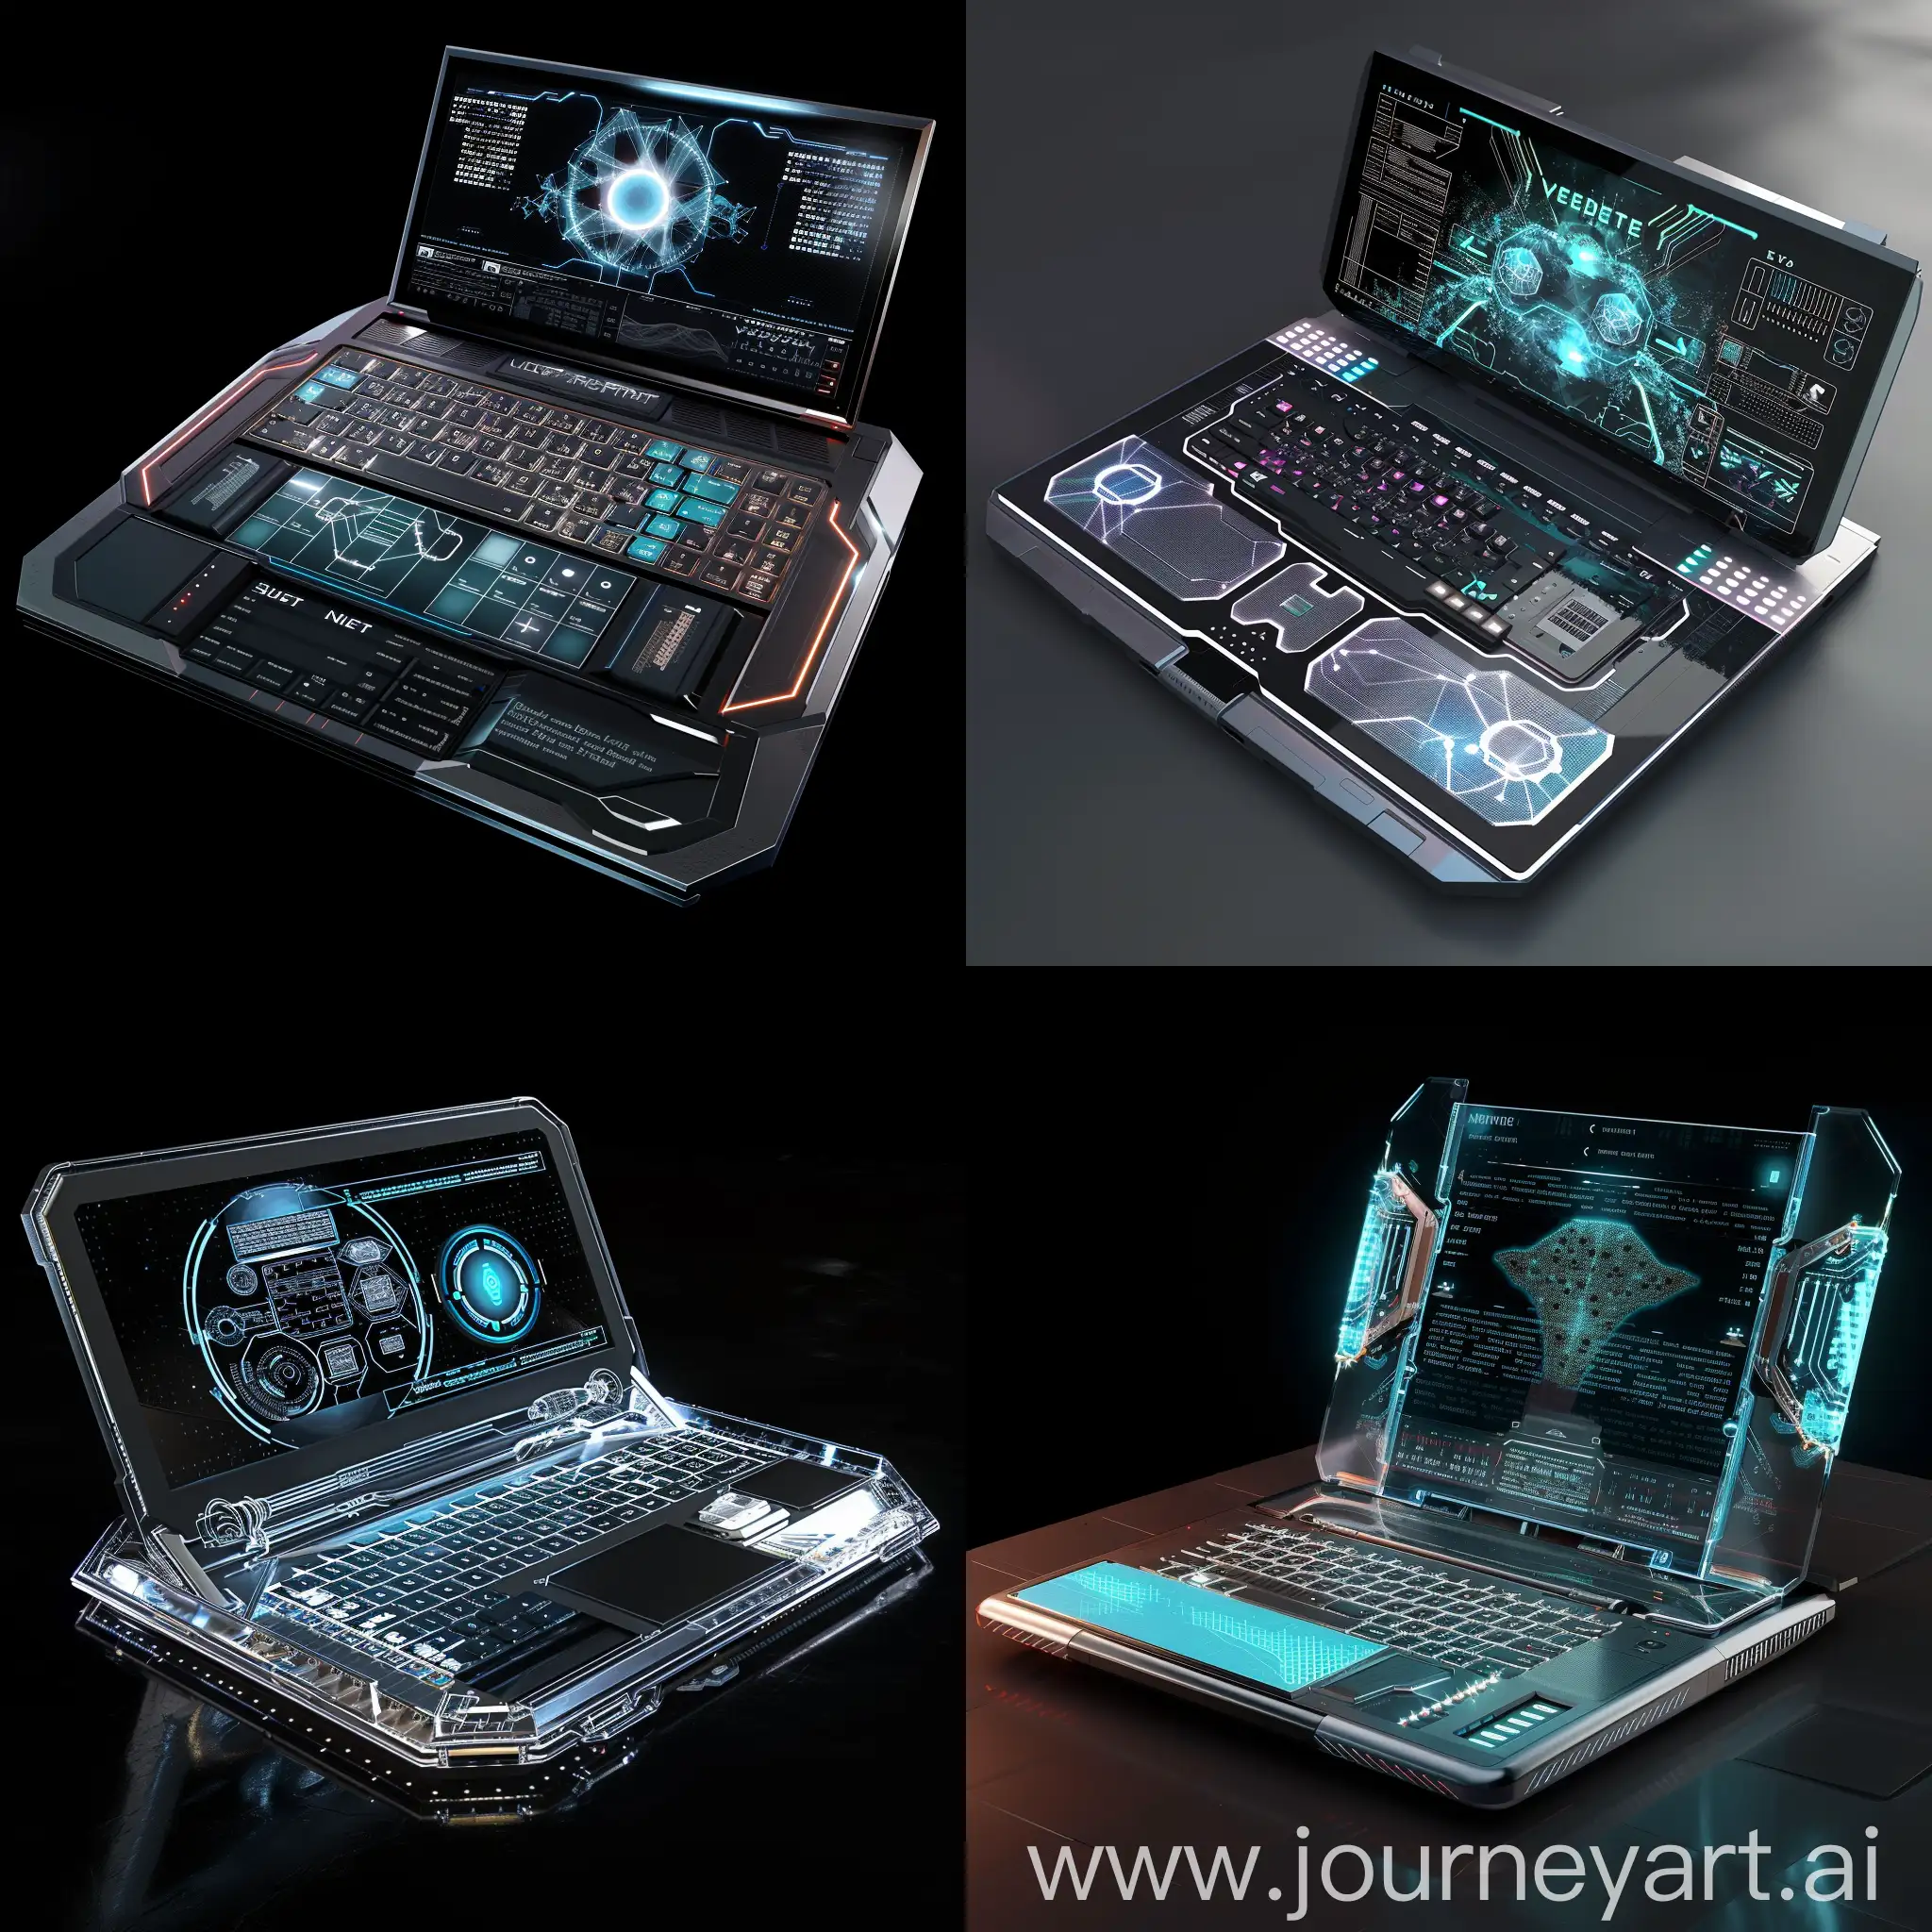 Futuristic laptop, in futuristic style, Quantum Computing Processor, Graphene-based Transistors, Optical Data Transfer, AI-Enhanced Neural Processing Unit (NPU), Holographic Storage, Holographic Storage, Energy Harvesting Modules, Bio-Sensing Security, Advanced Thermal Management, Modular Upgrade System, Flexible and Foldable Displays, Holographic Projection Interface, Transparent and Translucent Body, E-Ink Secondary Display, Haptic Feedback Touchpad and Keyboard, Solar-Powered Charging Surface, Adaptive and Programmable Keyboard, Augmented Reality (AR) Integration, Advanced Biometric Authentication, Magnetic and Modular Port System, Graphene-Based Components, Carbon Nanotube Transistors, Titanium Alloy Structural Frame, Nano-Composite Materials, Aerogel Insulation, 3D-Printed Internal Parts, Solid-State Batteries, Magnesium-Lithium Alloy Casings, Flexible Circuitry, High-Density Microchip Integration, Carbon Fiber Chassis, Liquidmetal Hinge, Reinforced Flexible Displays, Ceramic-Coated Exterior, Thin Titanium-Lithium Alloy Body, Corning Gorilla Glass Protection, Modular and Magnetically Attached Accessories, Self-Healing Polymers, E-Paper Secondary Display, Advanced Thermal Management Surfaces, unreal engine 5 --stylize 1000